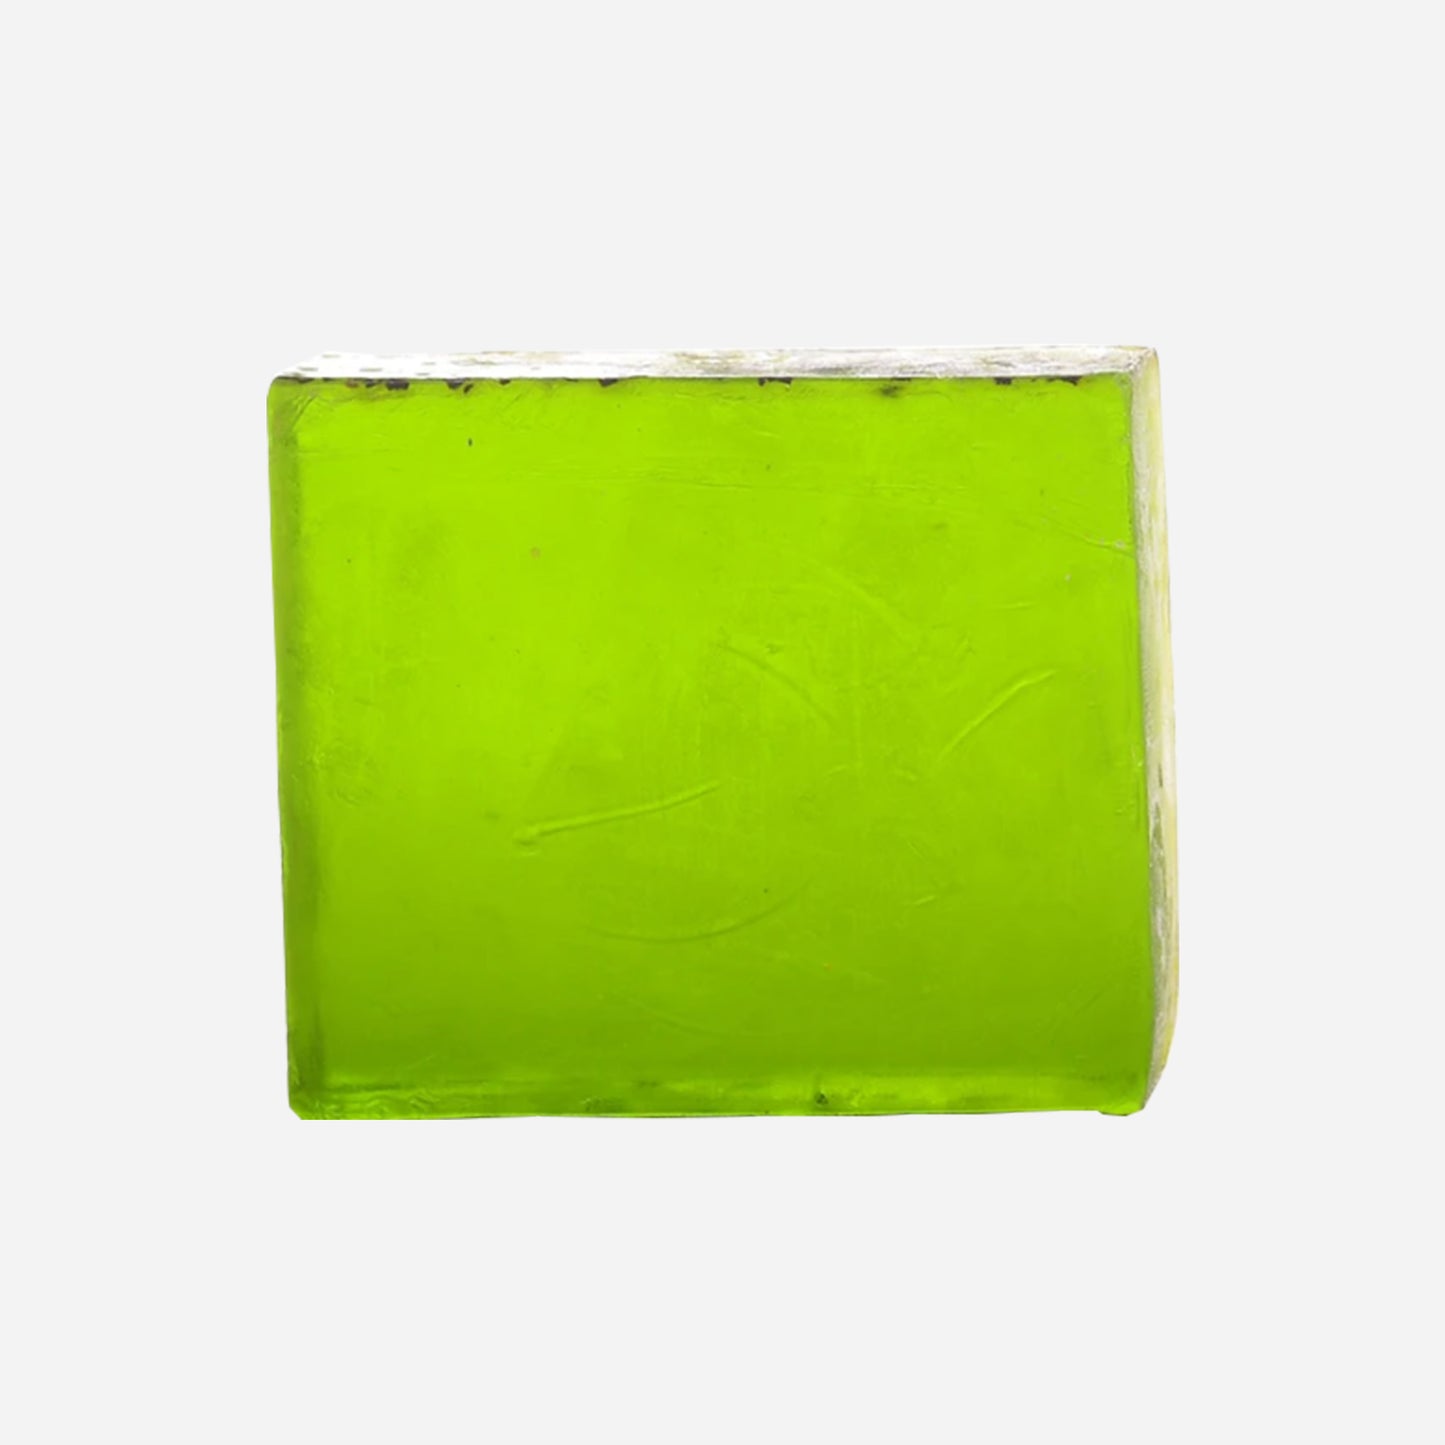 Load image into Gallery viewer, Cucumber Cooling Glycerin Soap 100g
